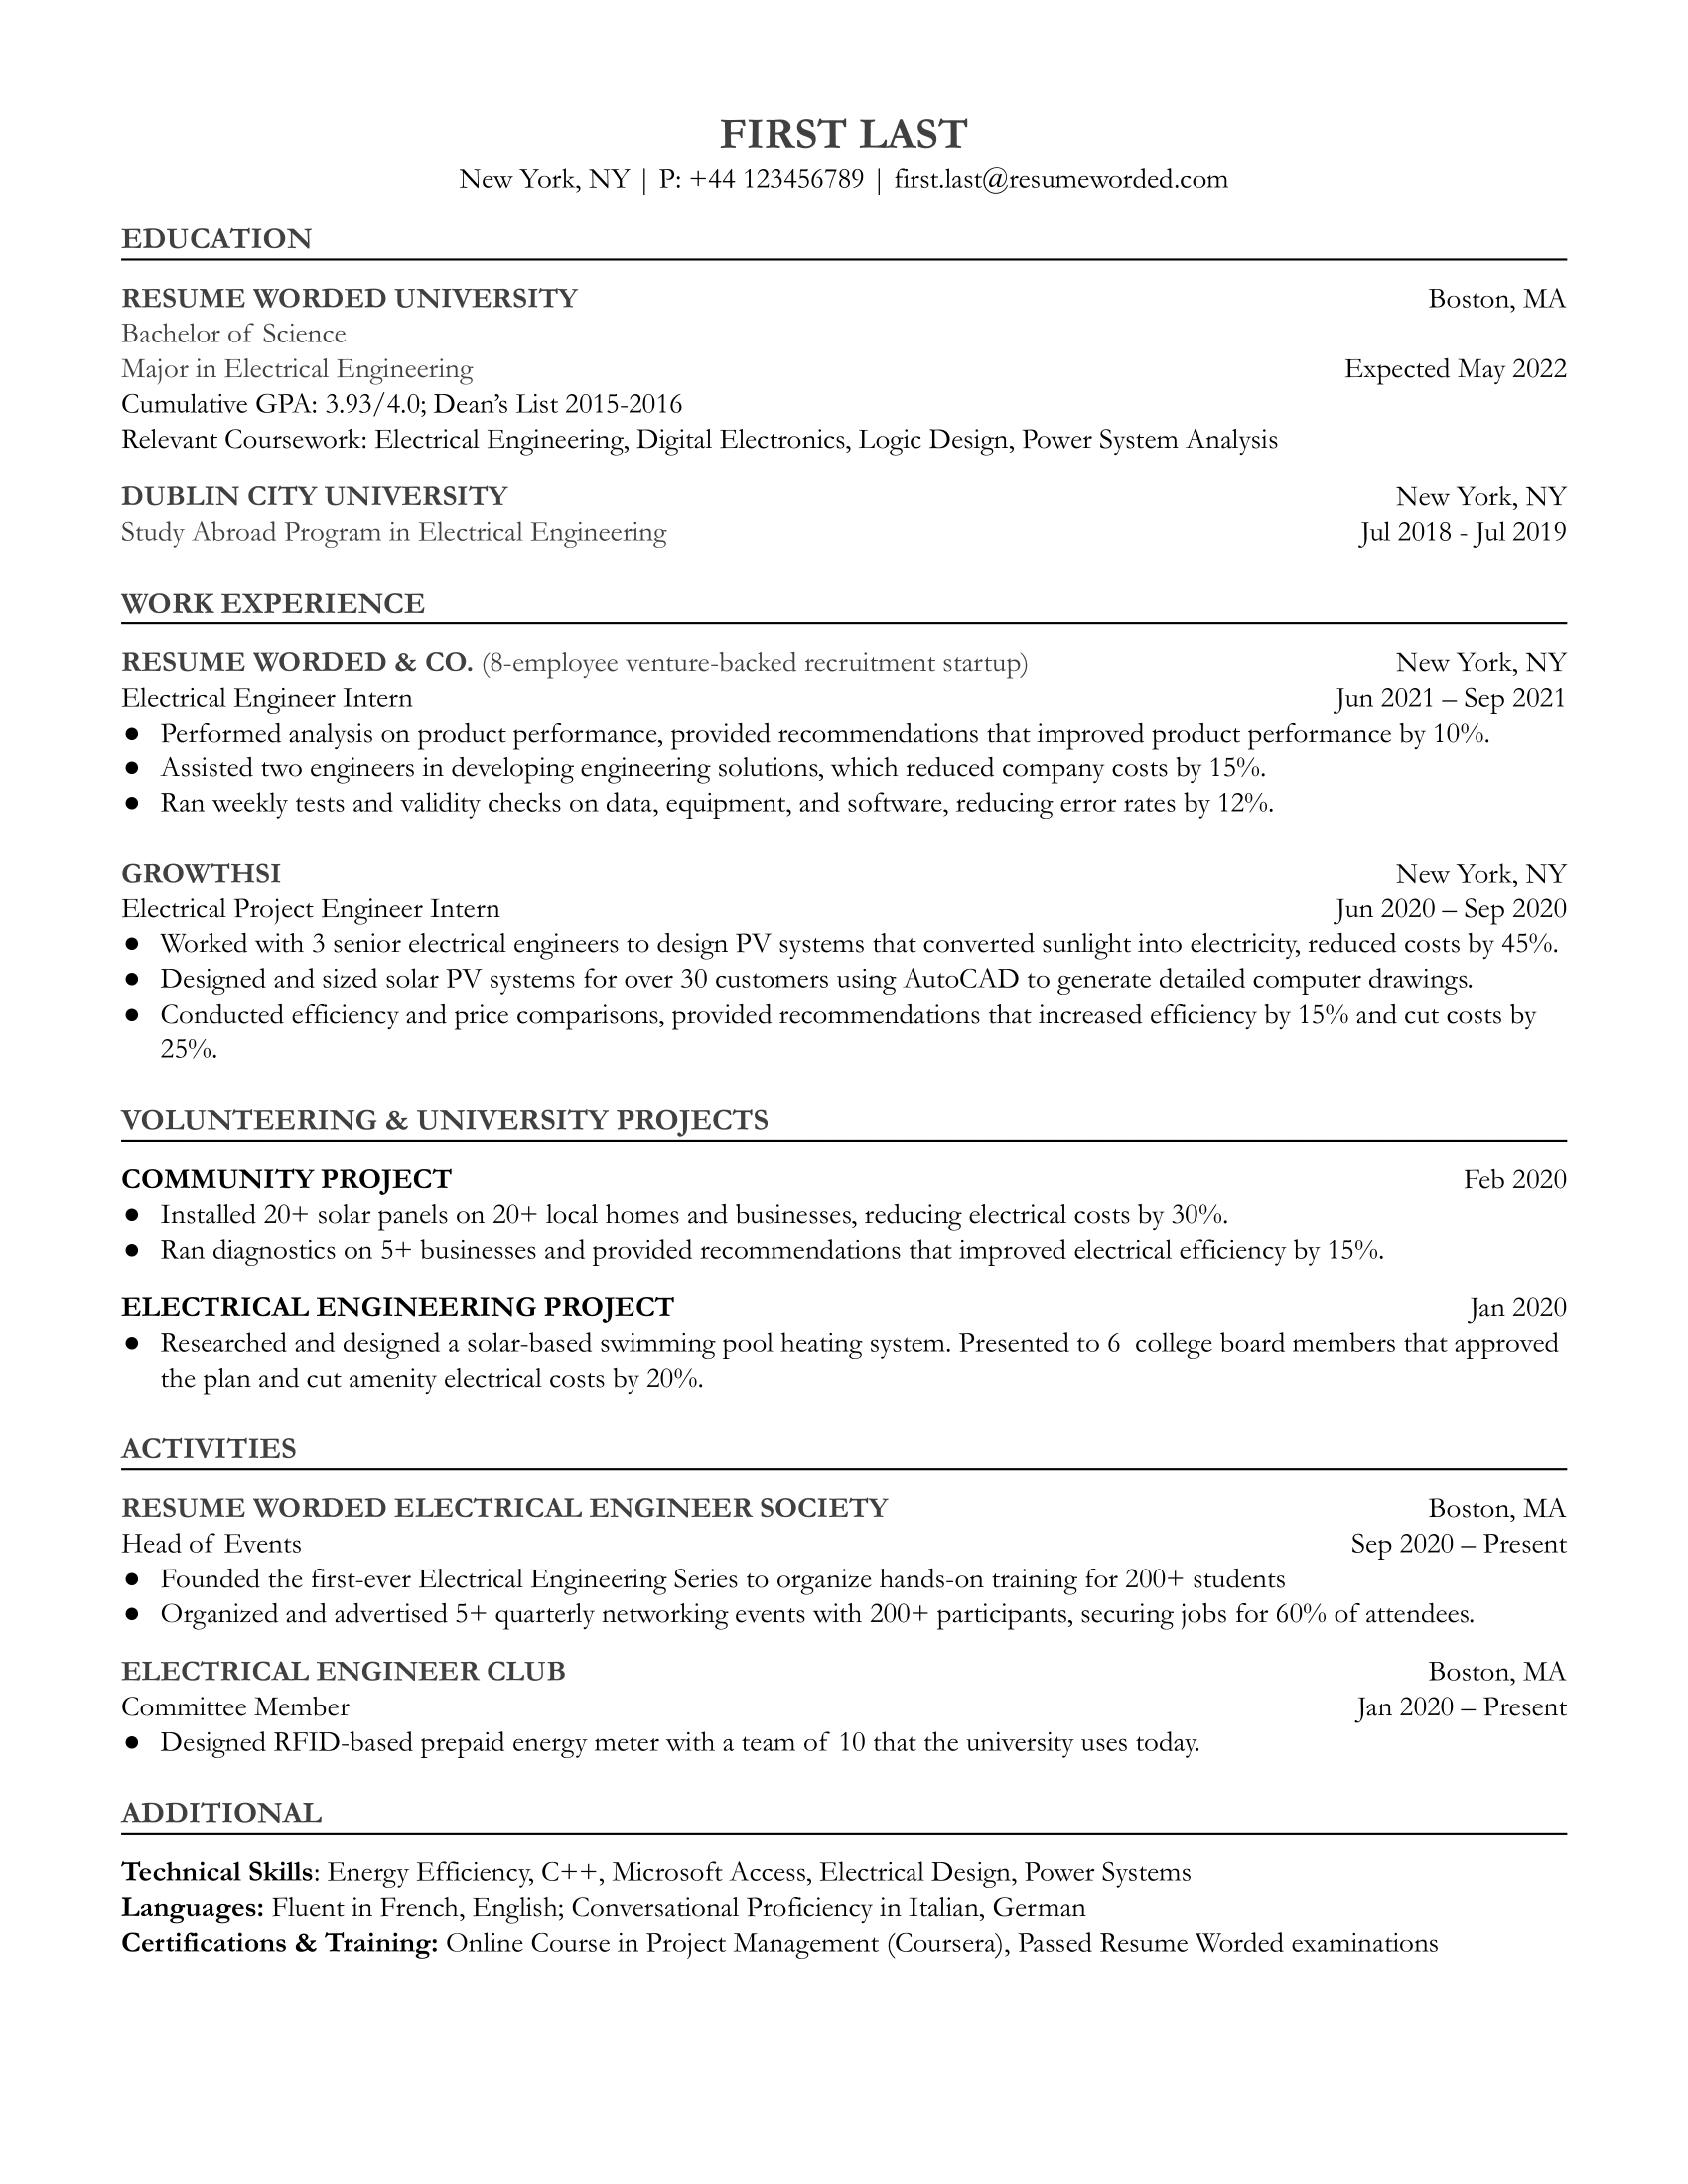 A CV for an Entry Level Electrical Engineer position.